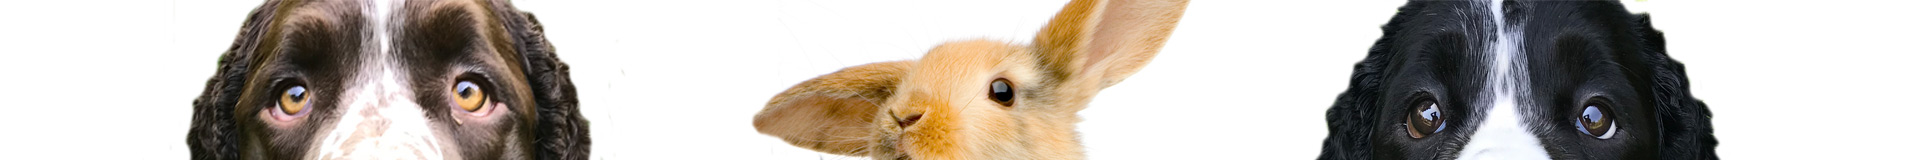 Dogs-bunny-banner